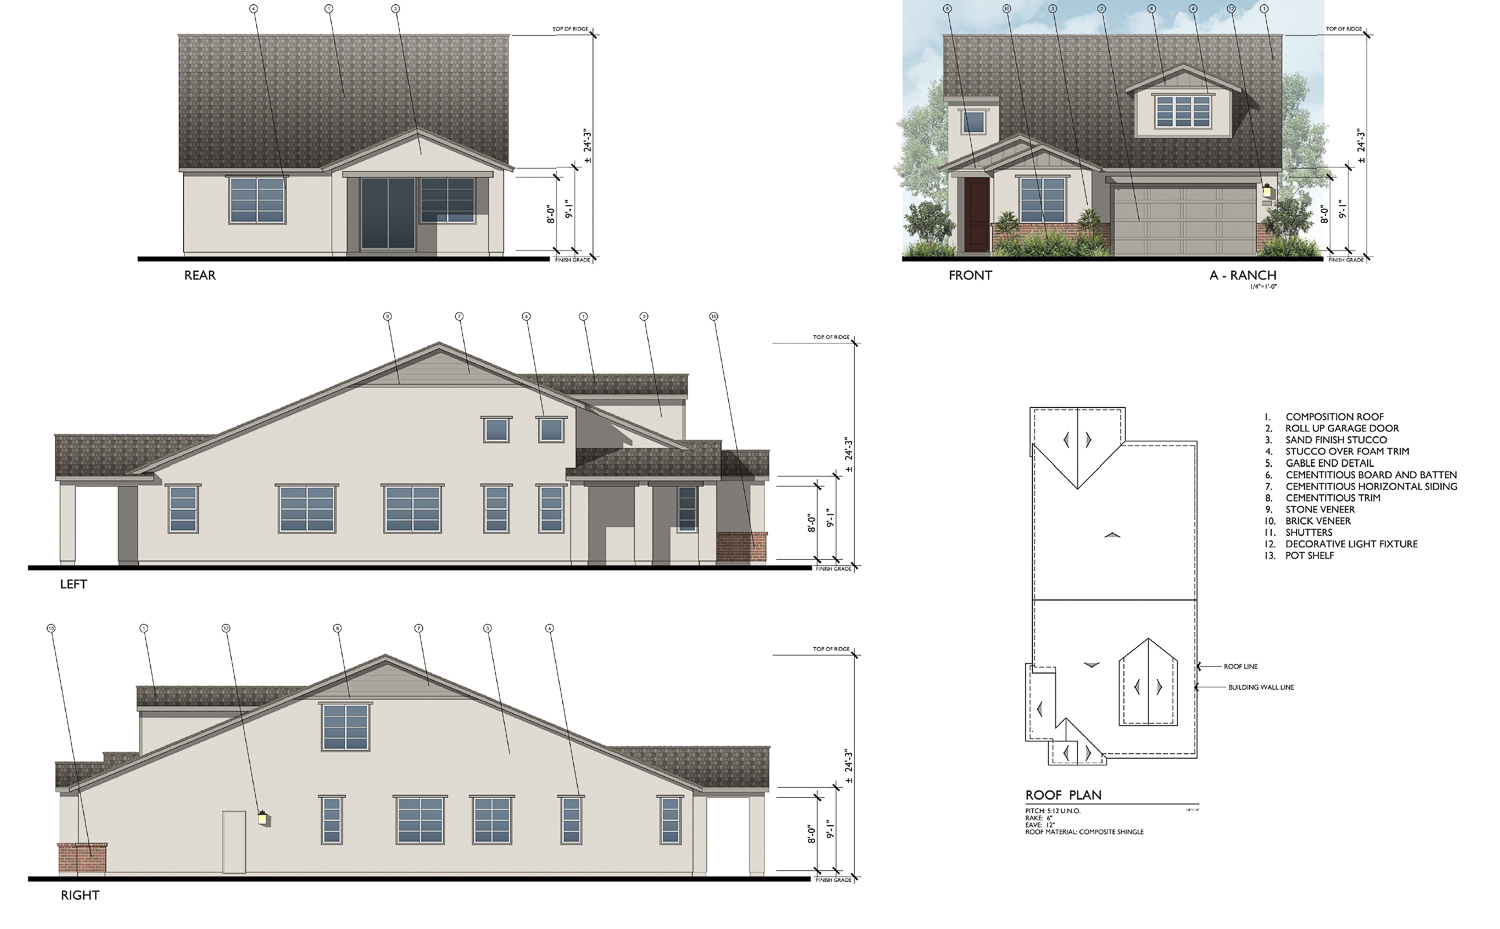 15395 Sycamore Drive ranch-style home, illustration by Bassenian Lagoni Architecture + Planning